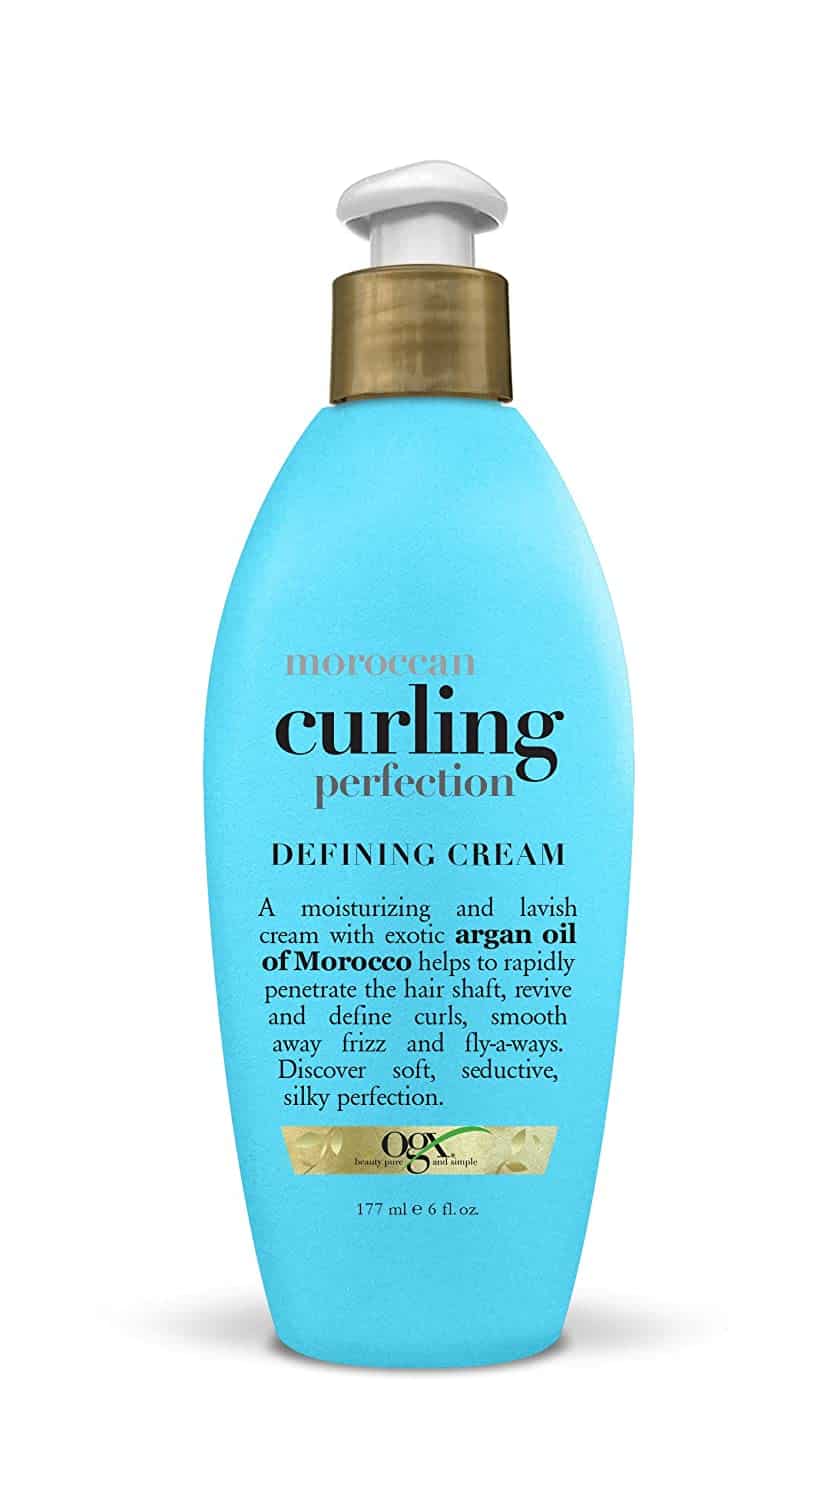 OGX Moroccan Curling Perfection Defining Cream